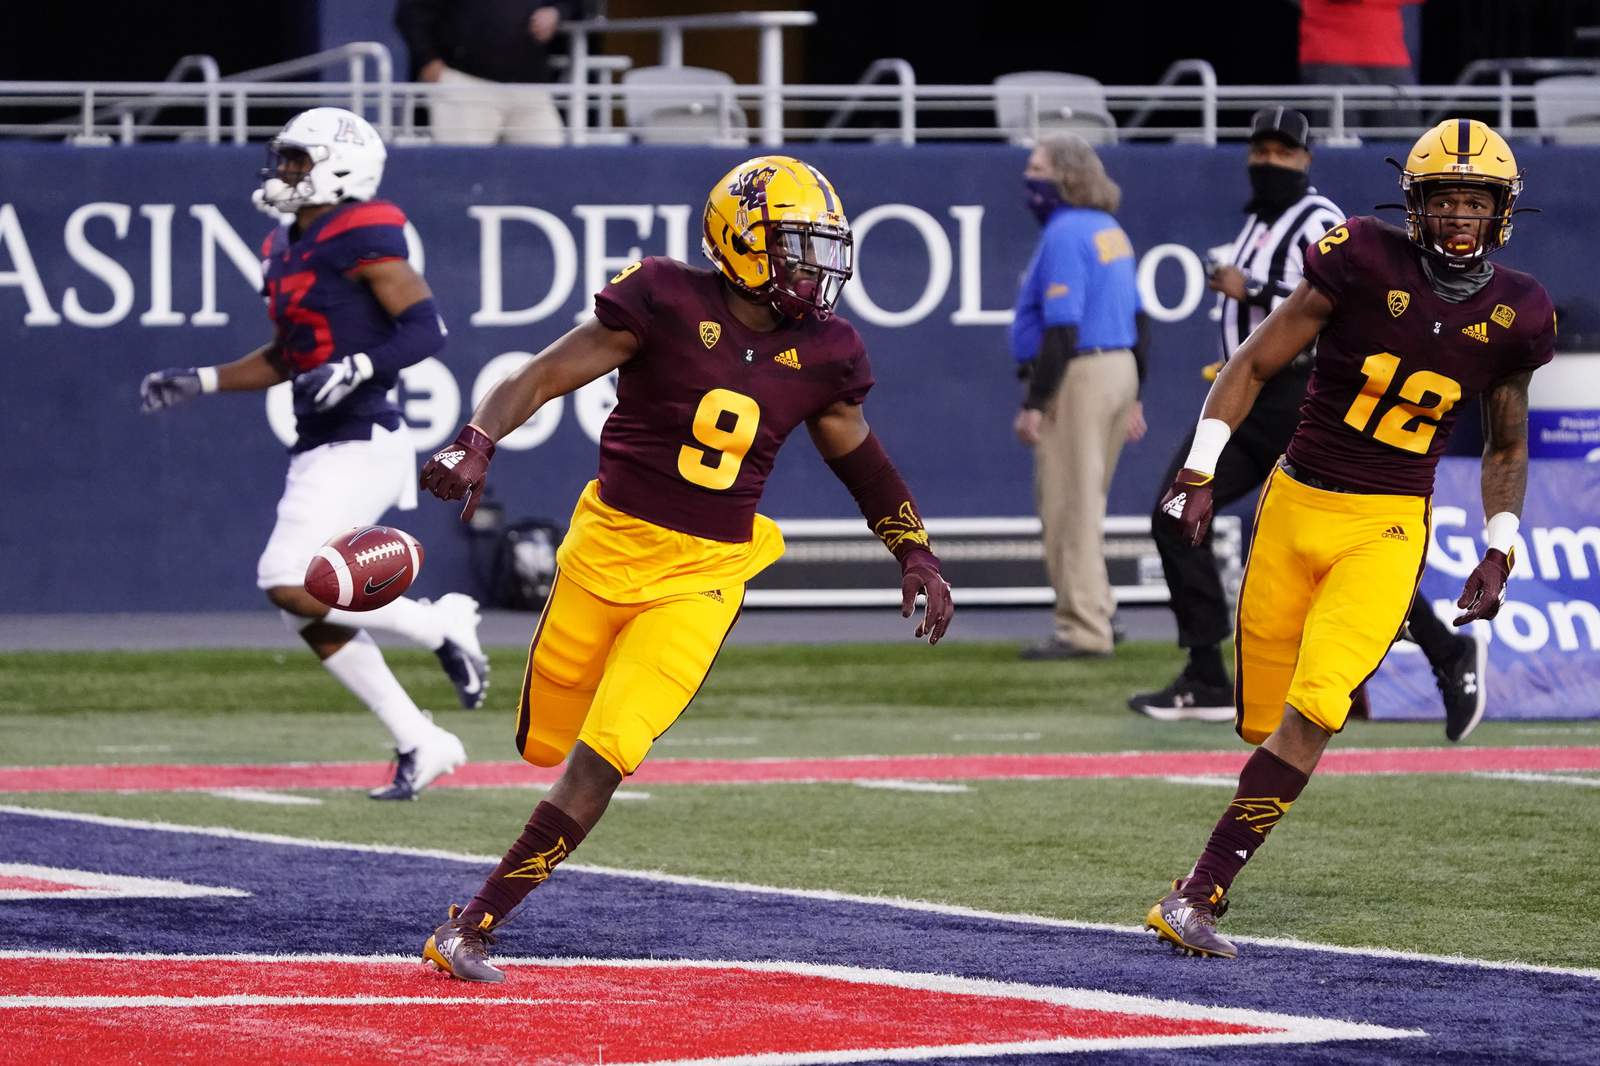 Territorial rout: Arizona State blows out rival Arizona 70-7